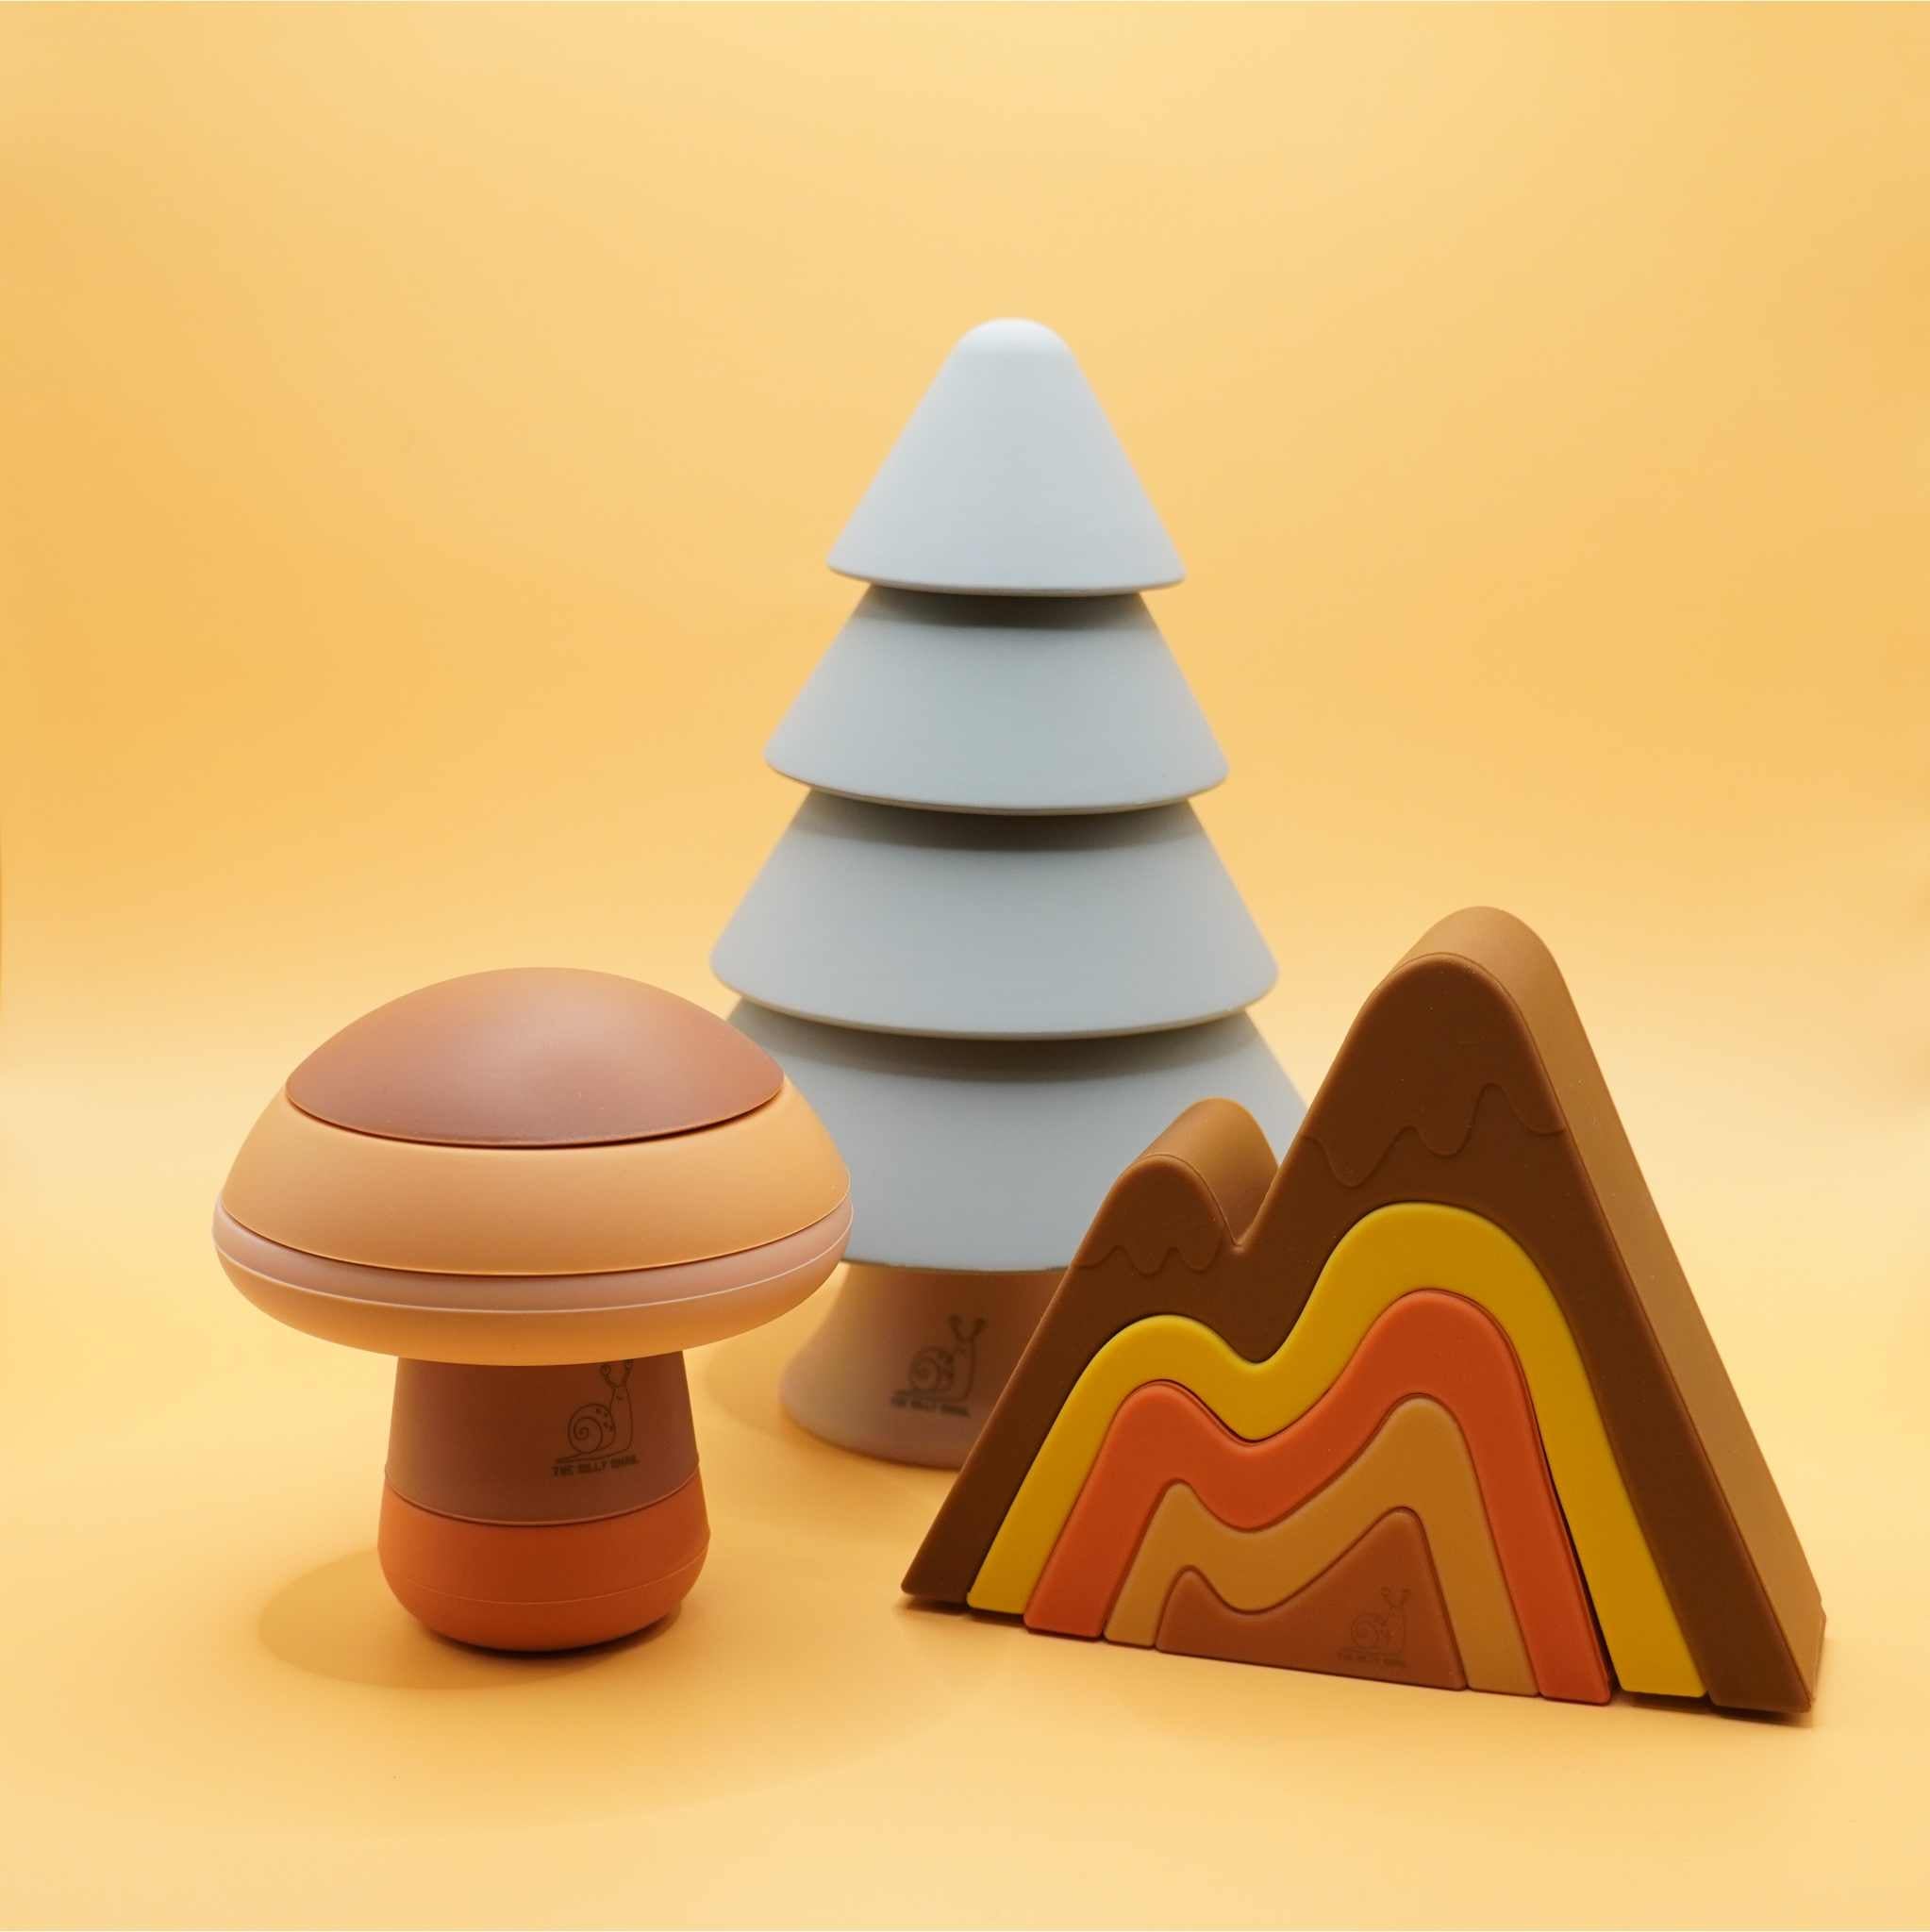 Enchanted Forest silicone stacking toy set with mushroom, tree, and mountain